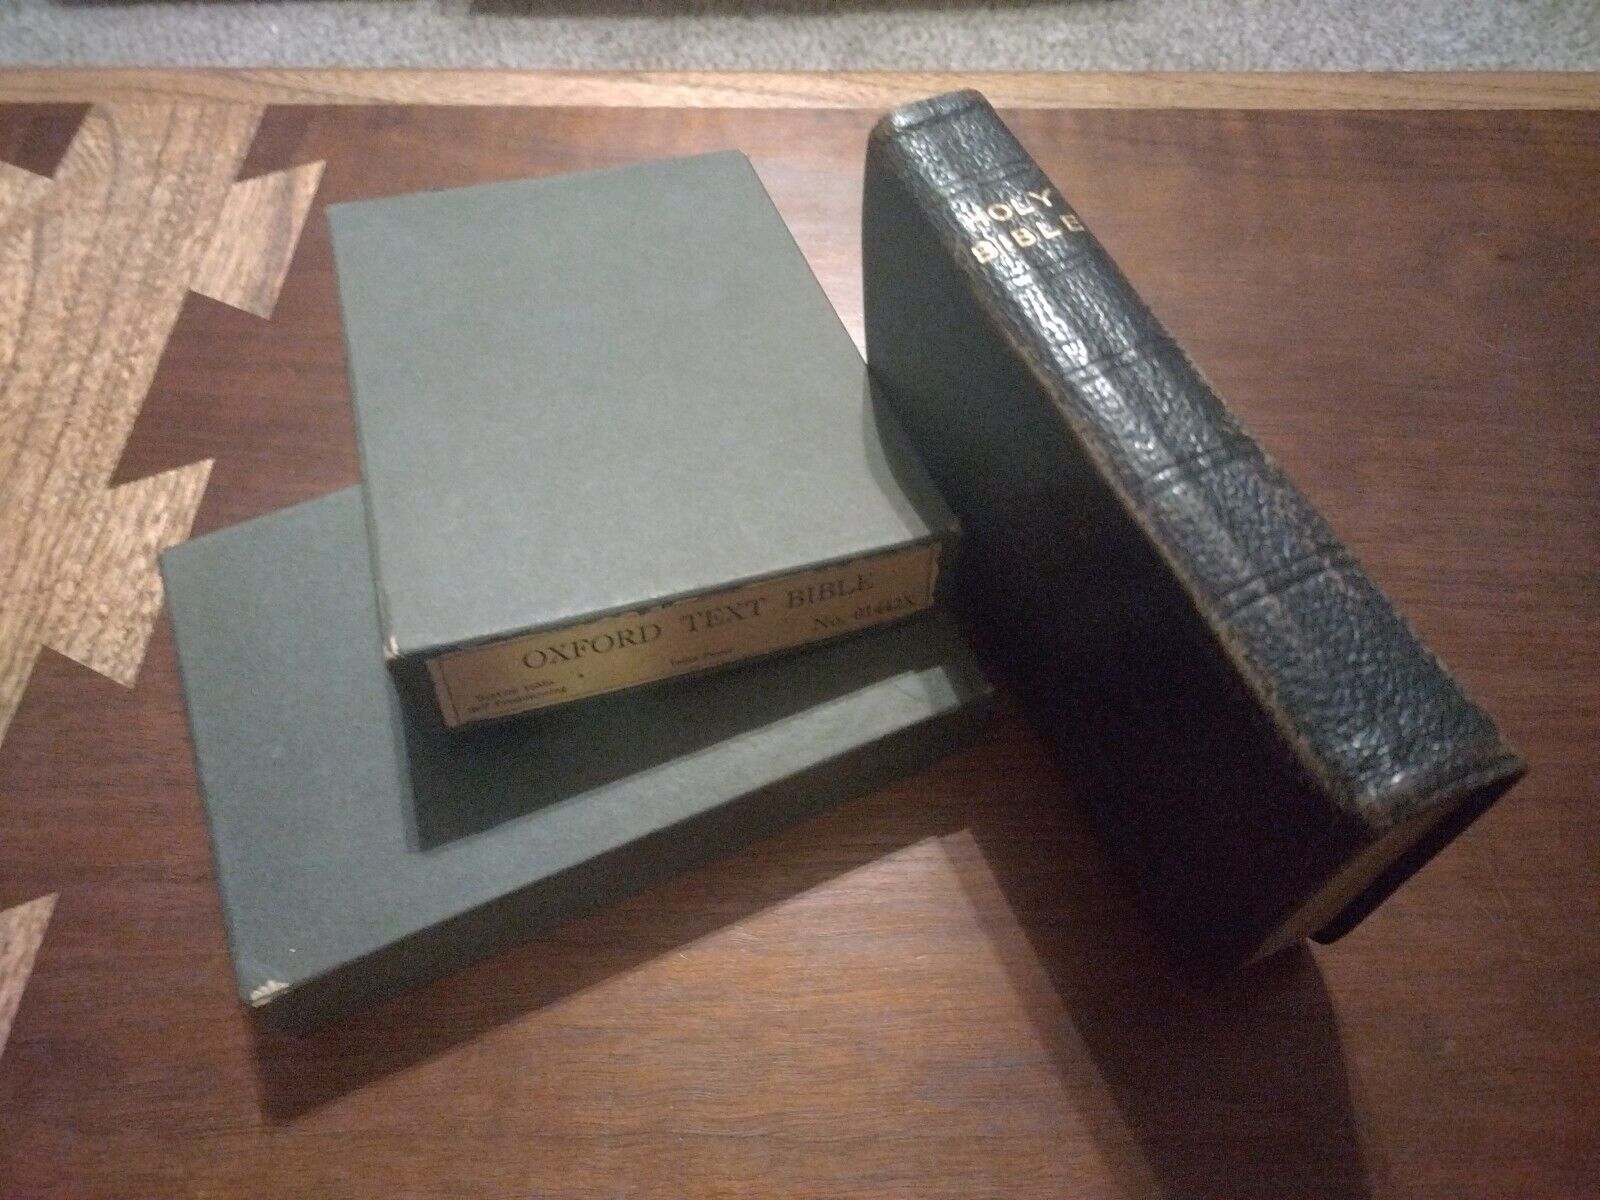 Oxford Text Holy Bible Leather w/ Box VINTAGE Brevier 16Mo India Paper No.01442X